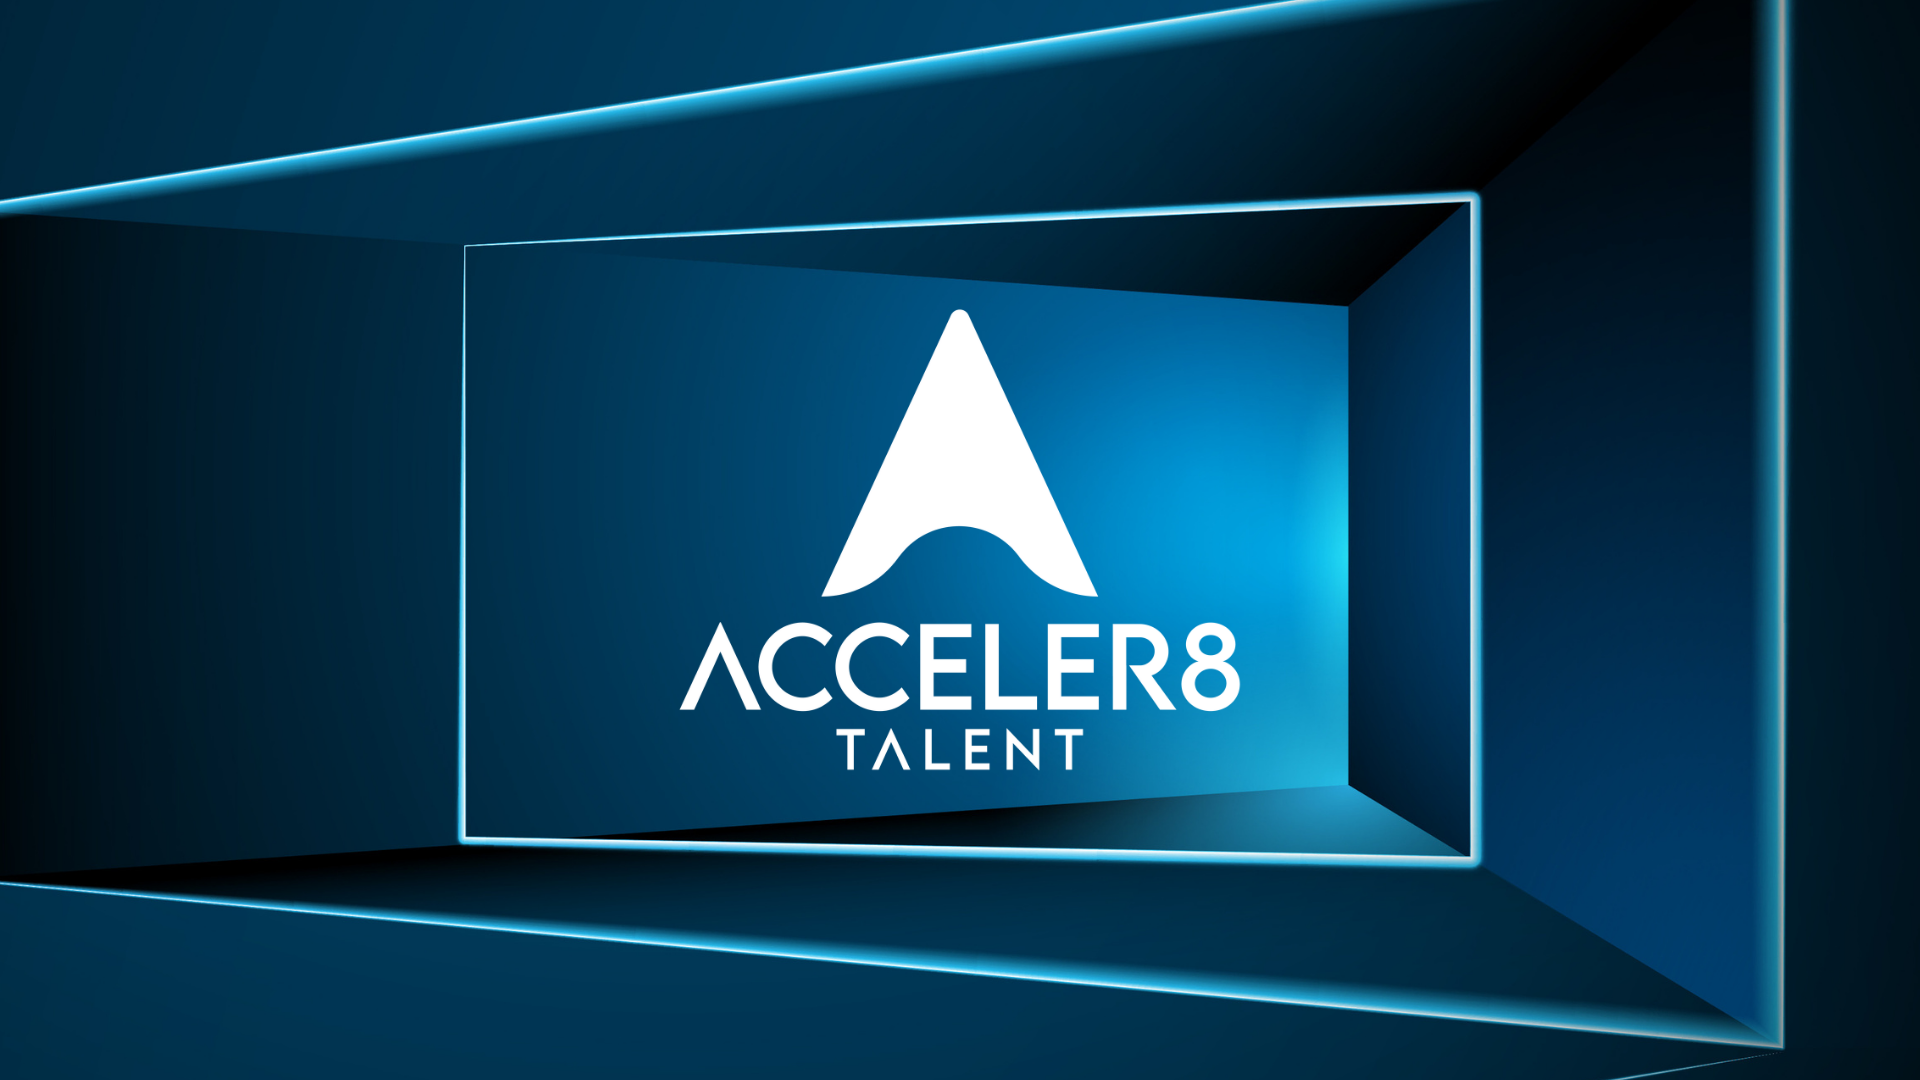 Introducing Acceler8 Talent - Our US Consultancy Rebrands